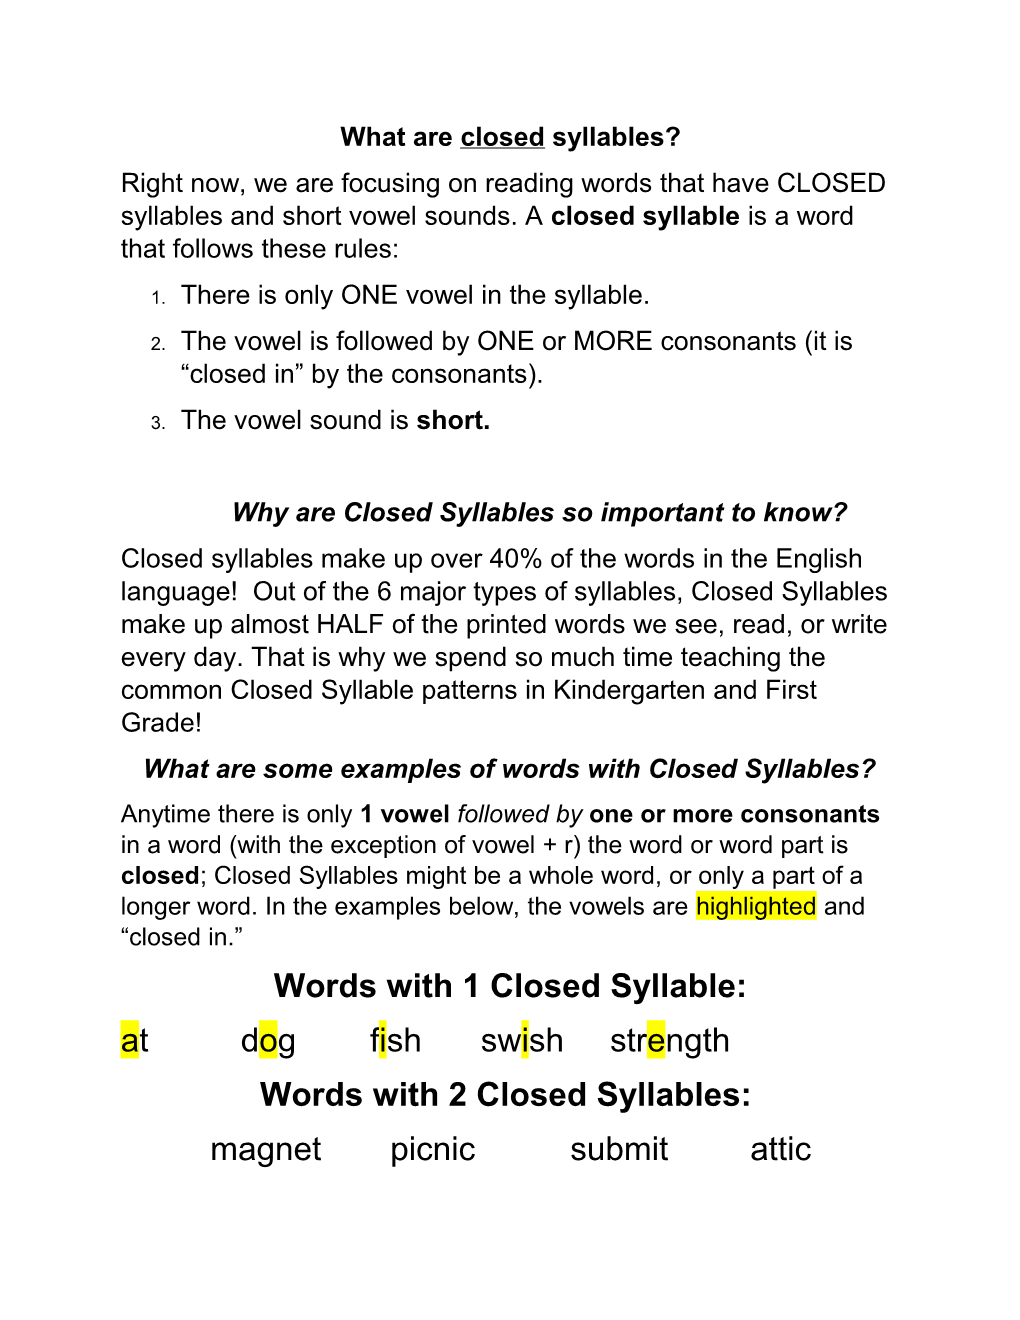 What Are Closed Syllables?